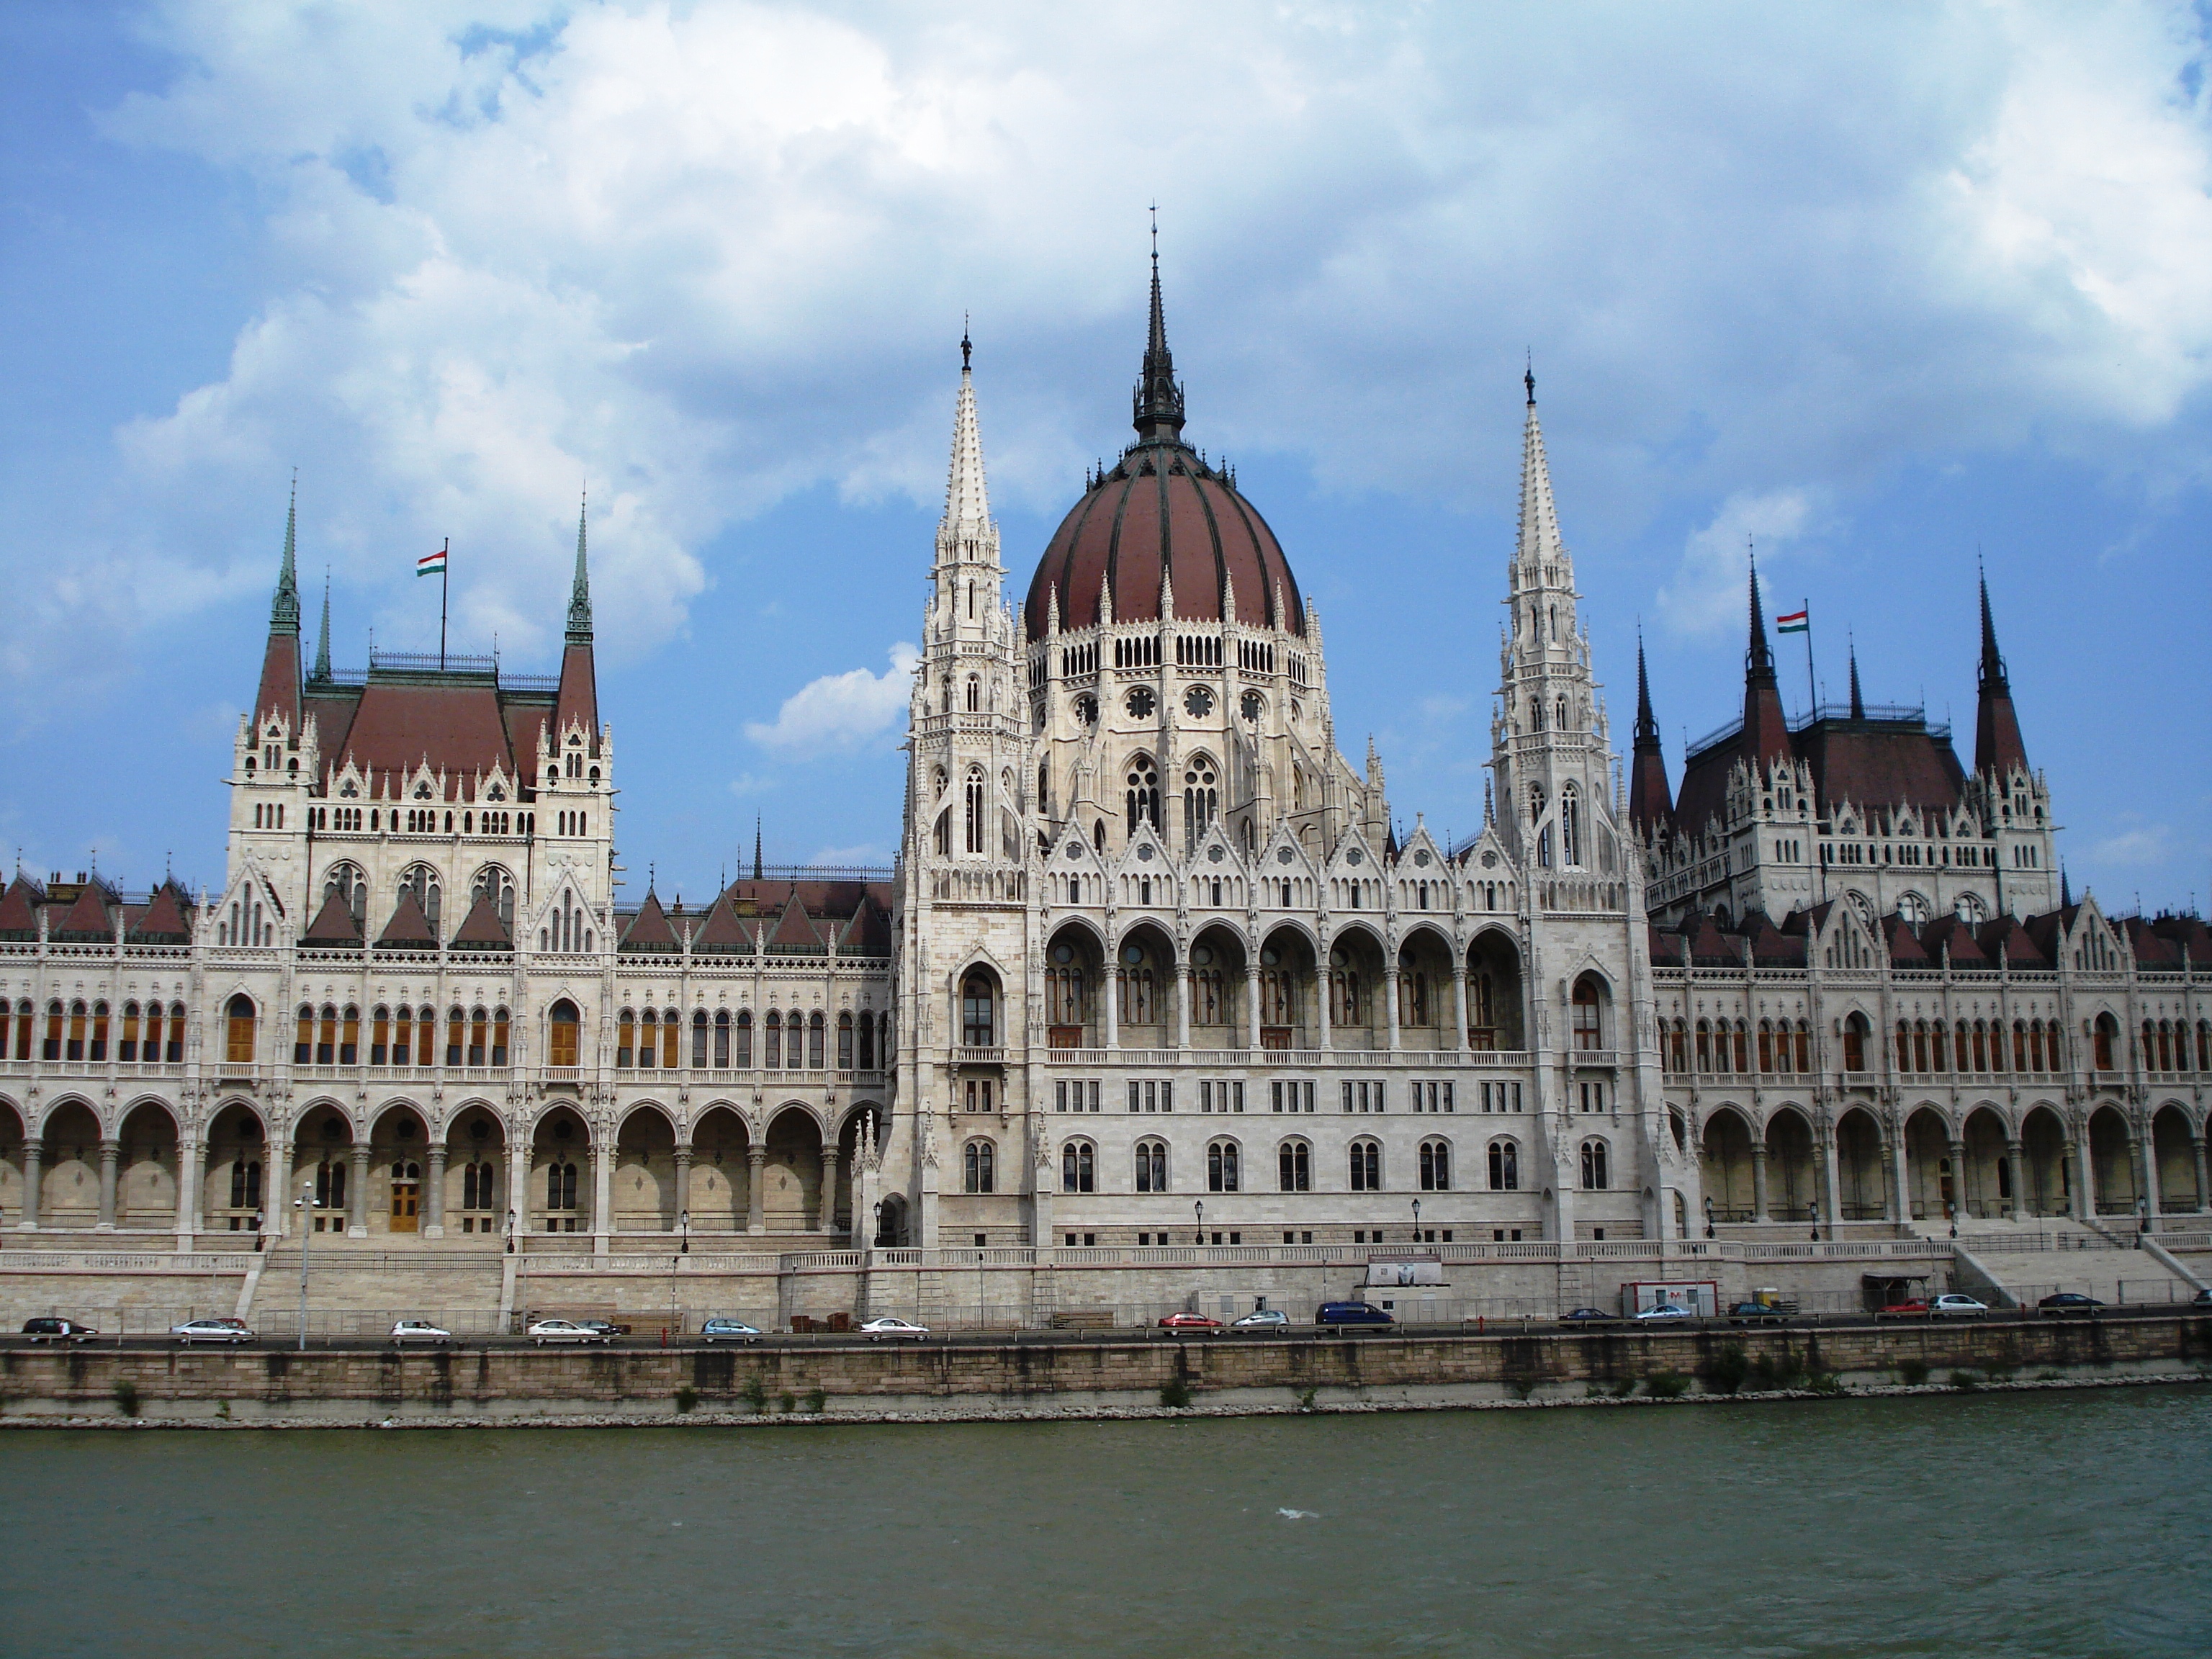 Inaugurated in 1904, the Hungarian Parliament is the second largest Parliament in Europe, and the third largest in the world